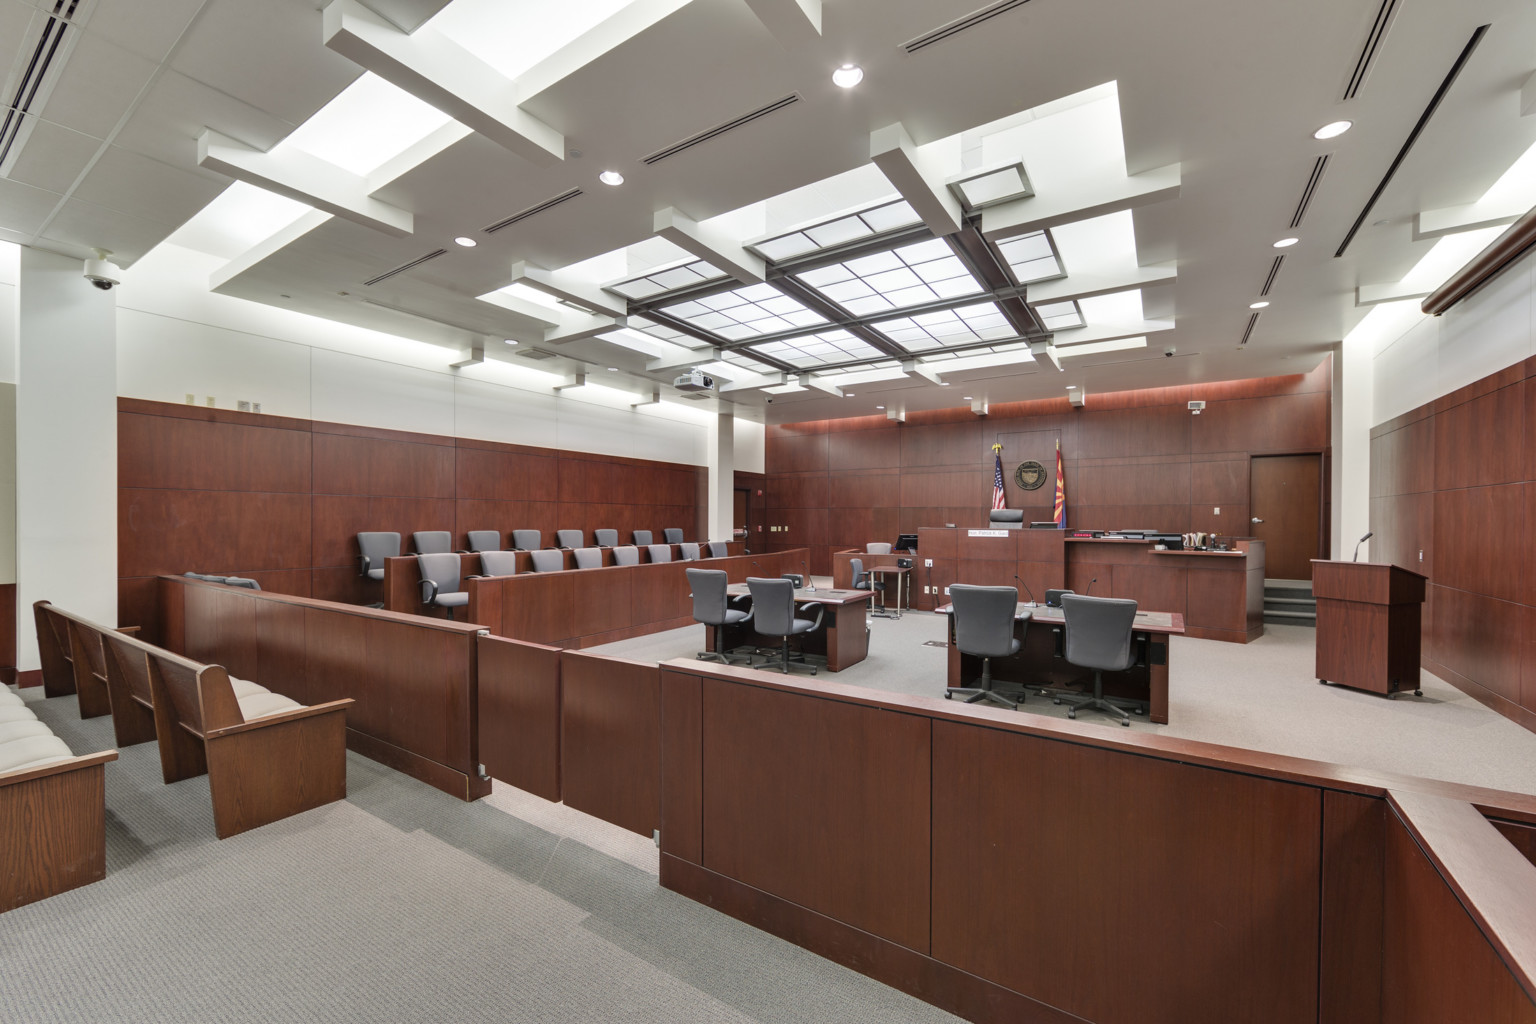 Pinal County courtroom with wooden features and grey seats looking toward judge seat